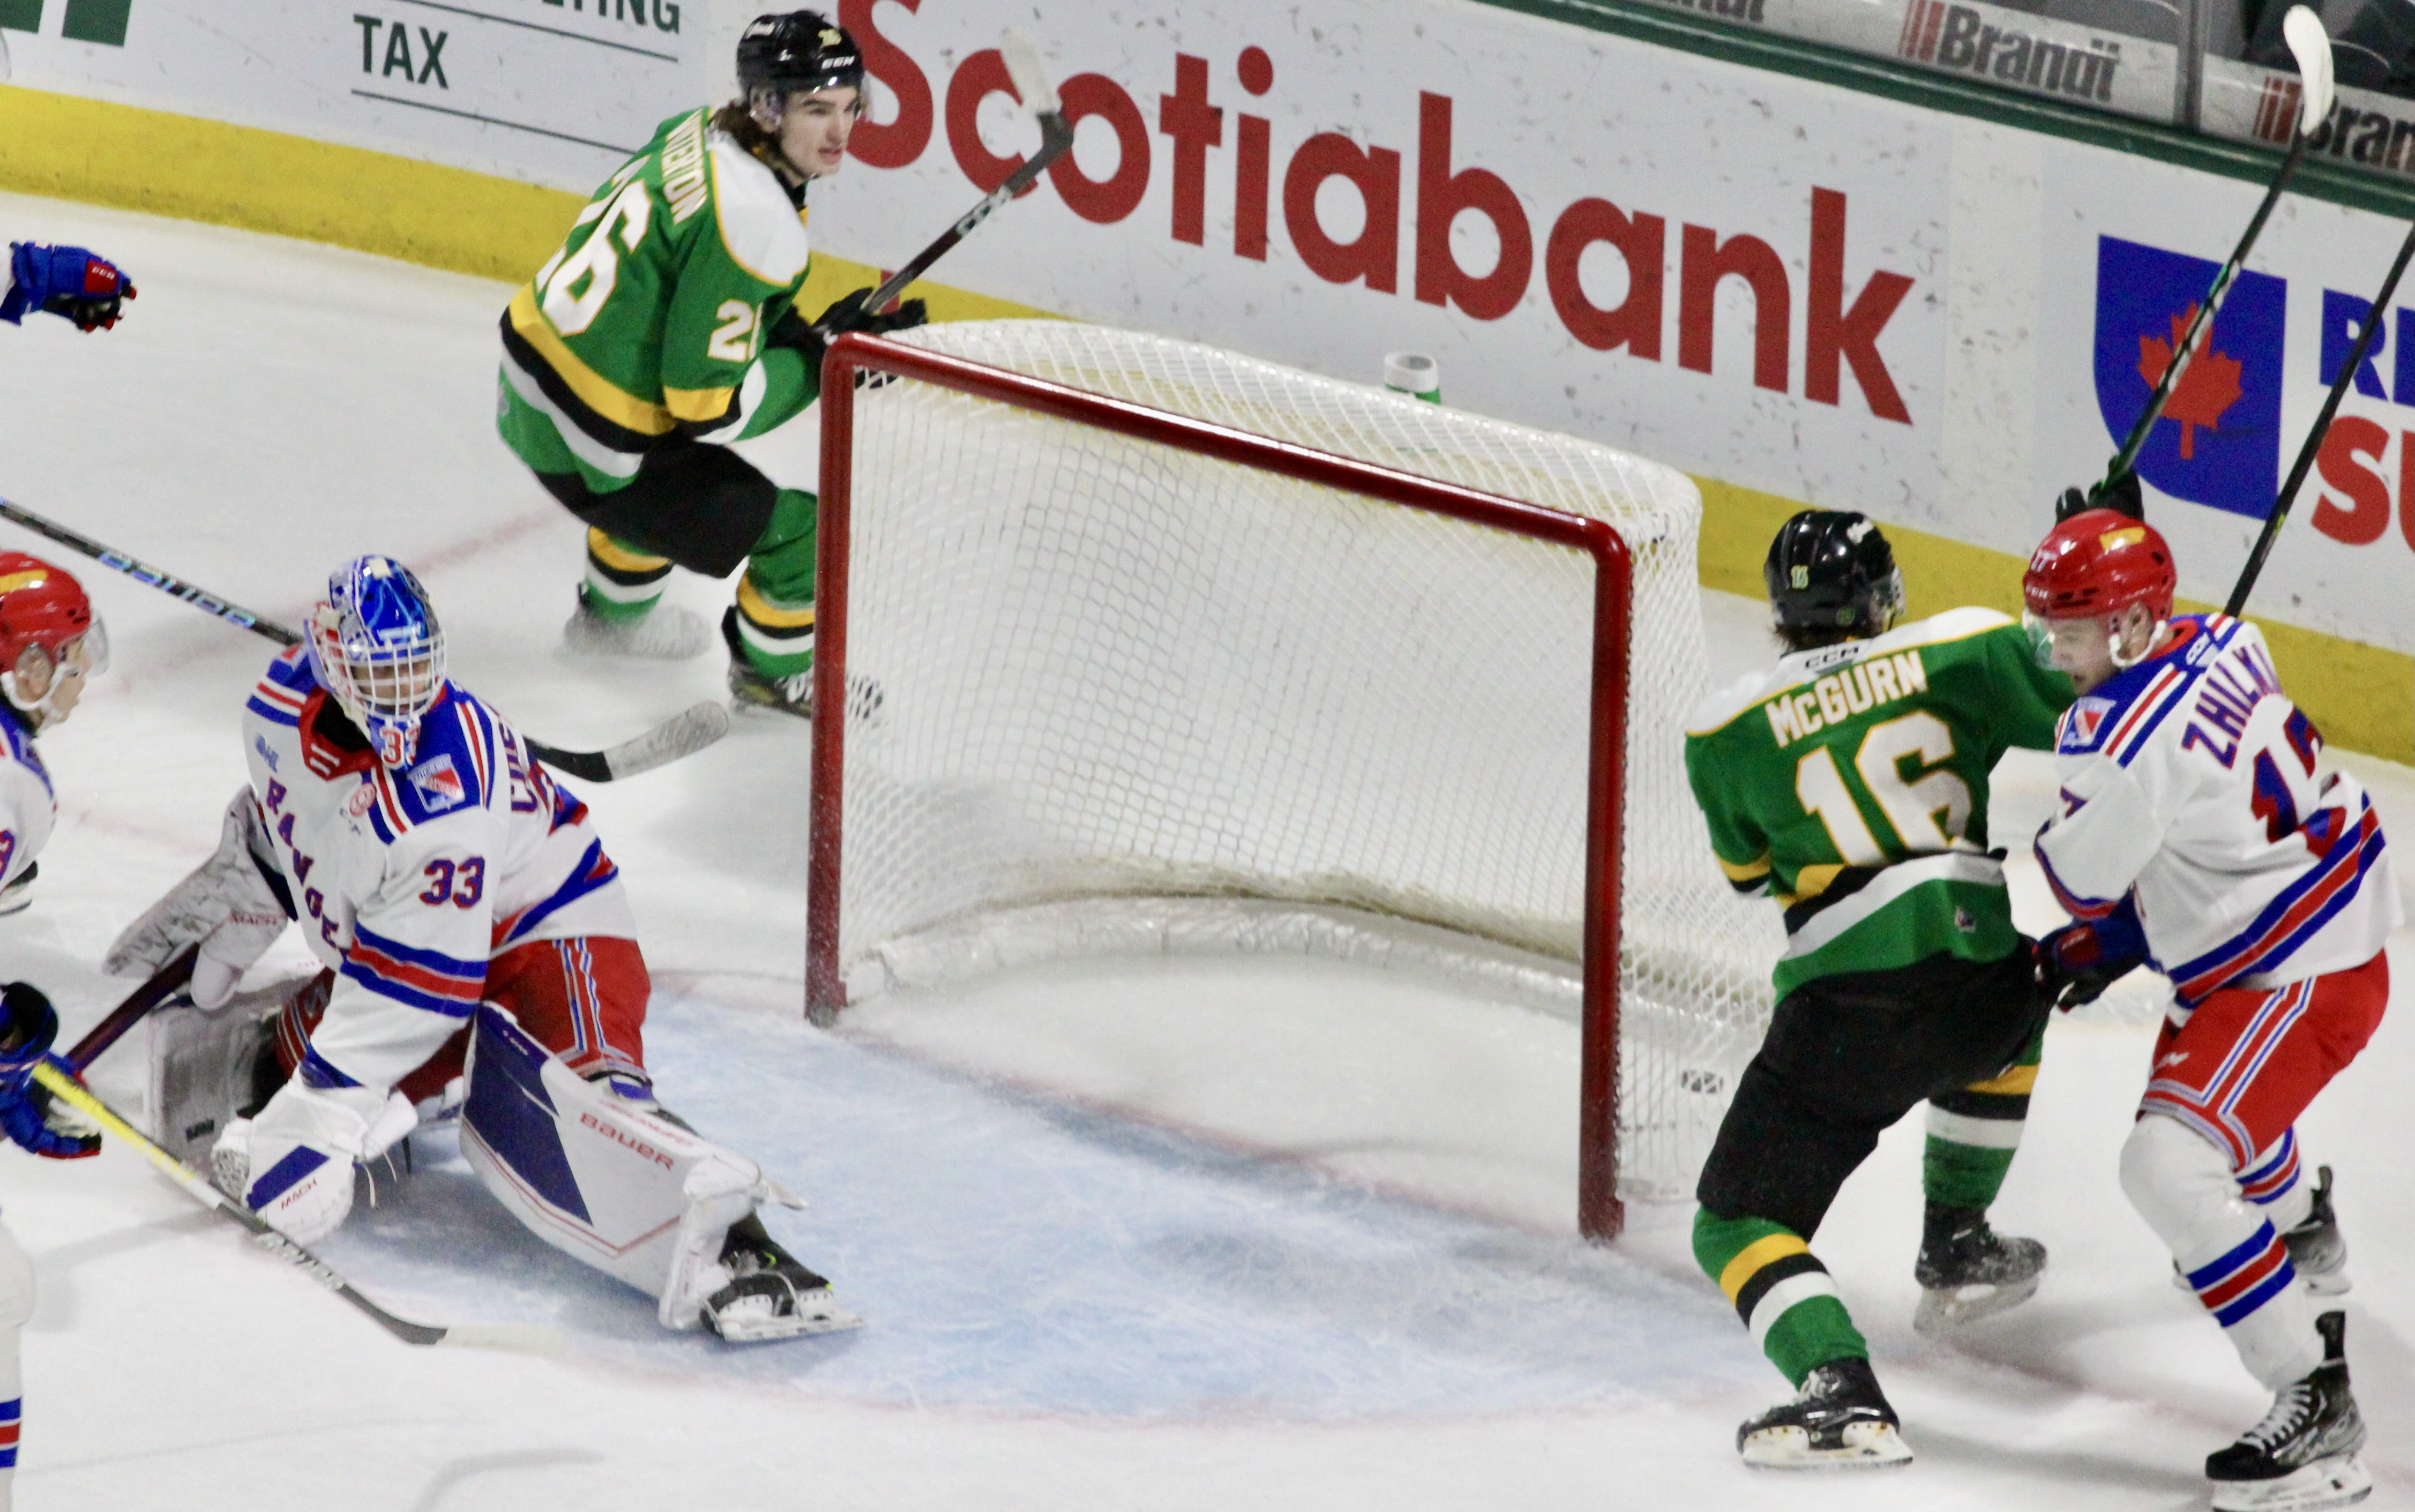 London Knights edge Kitchener Rangers 5-4 for their sixth straight victory